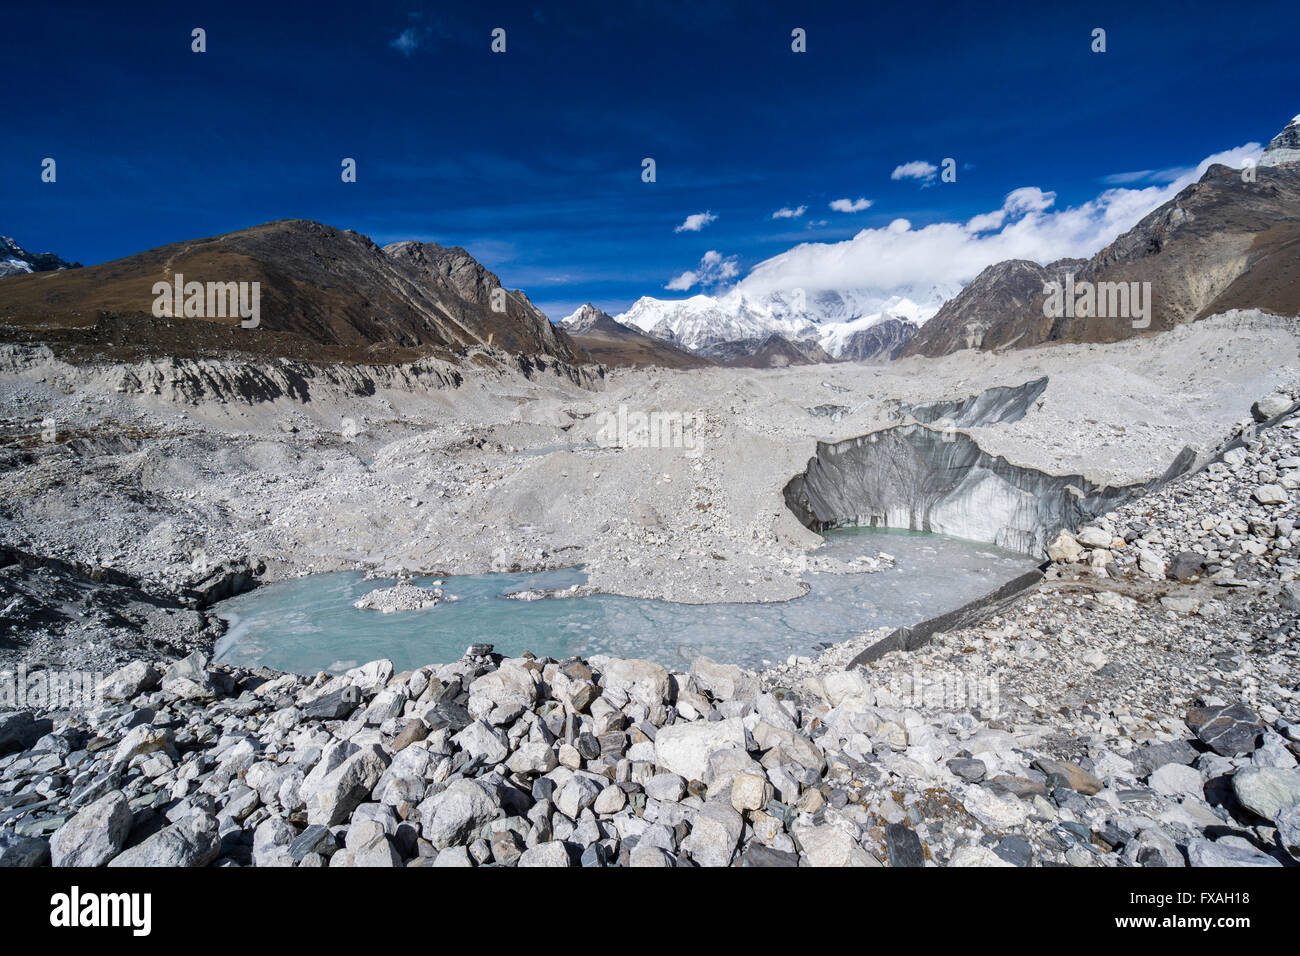 View of the Ngozumba Glacier, snow covered mountains in the distance, Gokyo, Solo Khumbu, Nepal Stock Photo